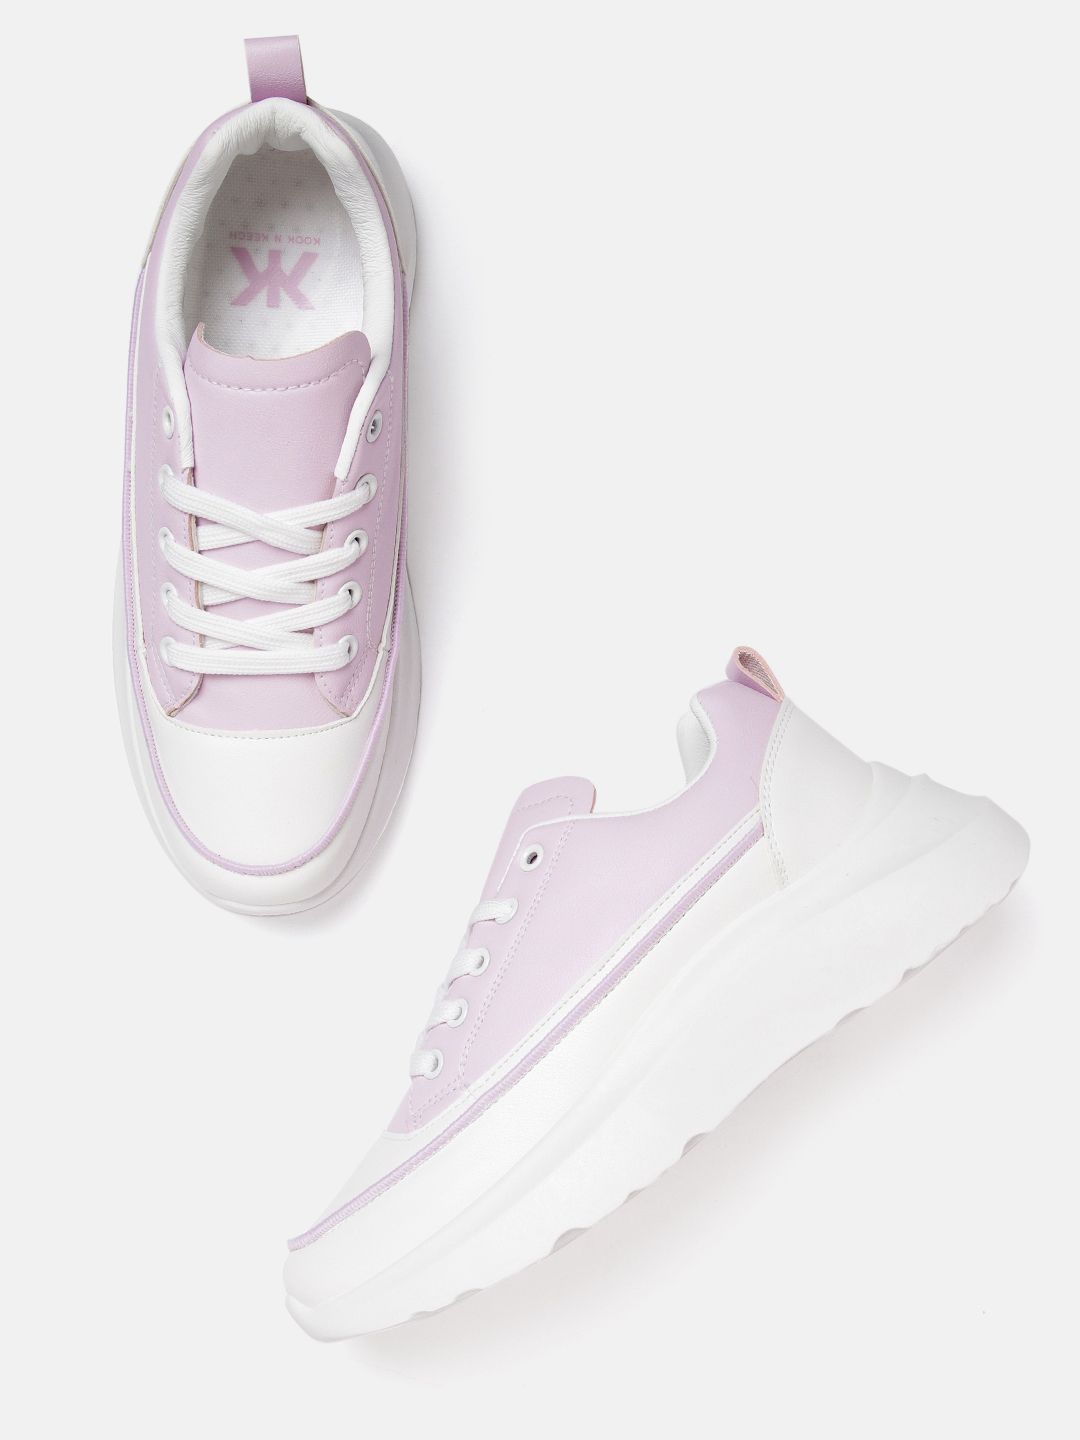 Kook N Keech Women Lilac & White Solid Sneakers Price in India